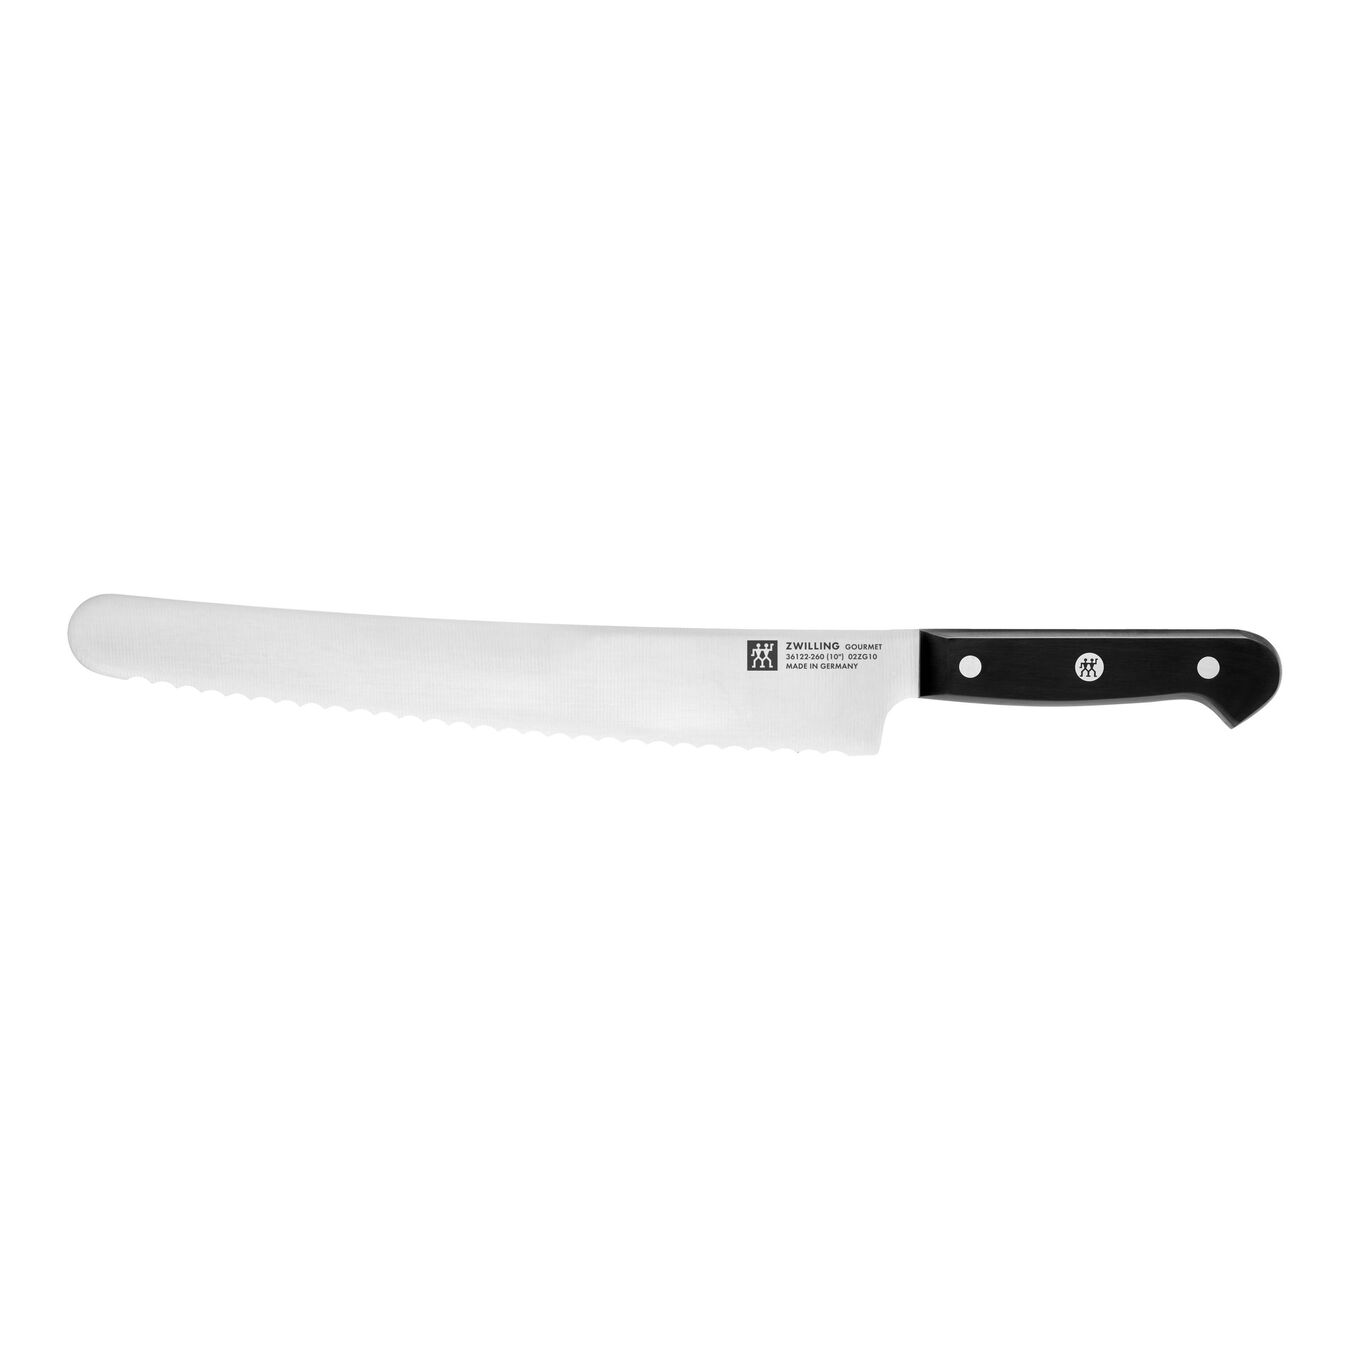 26 cm Pastry knife,,large 1